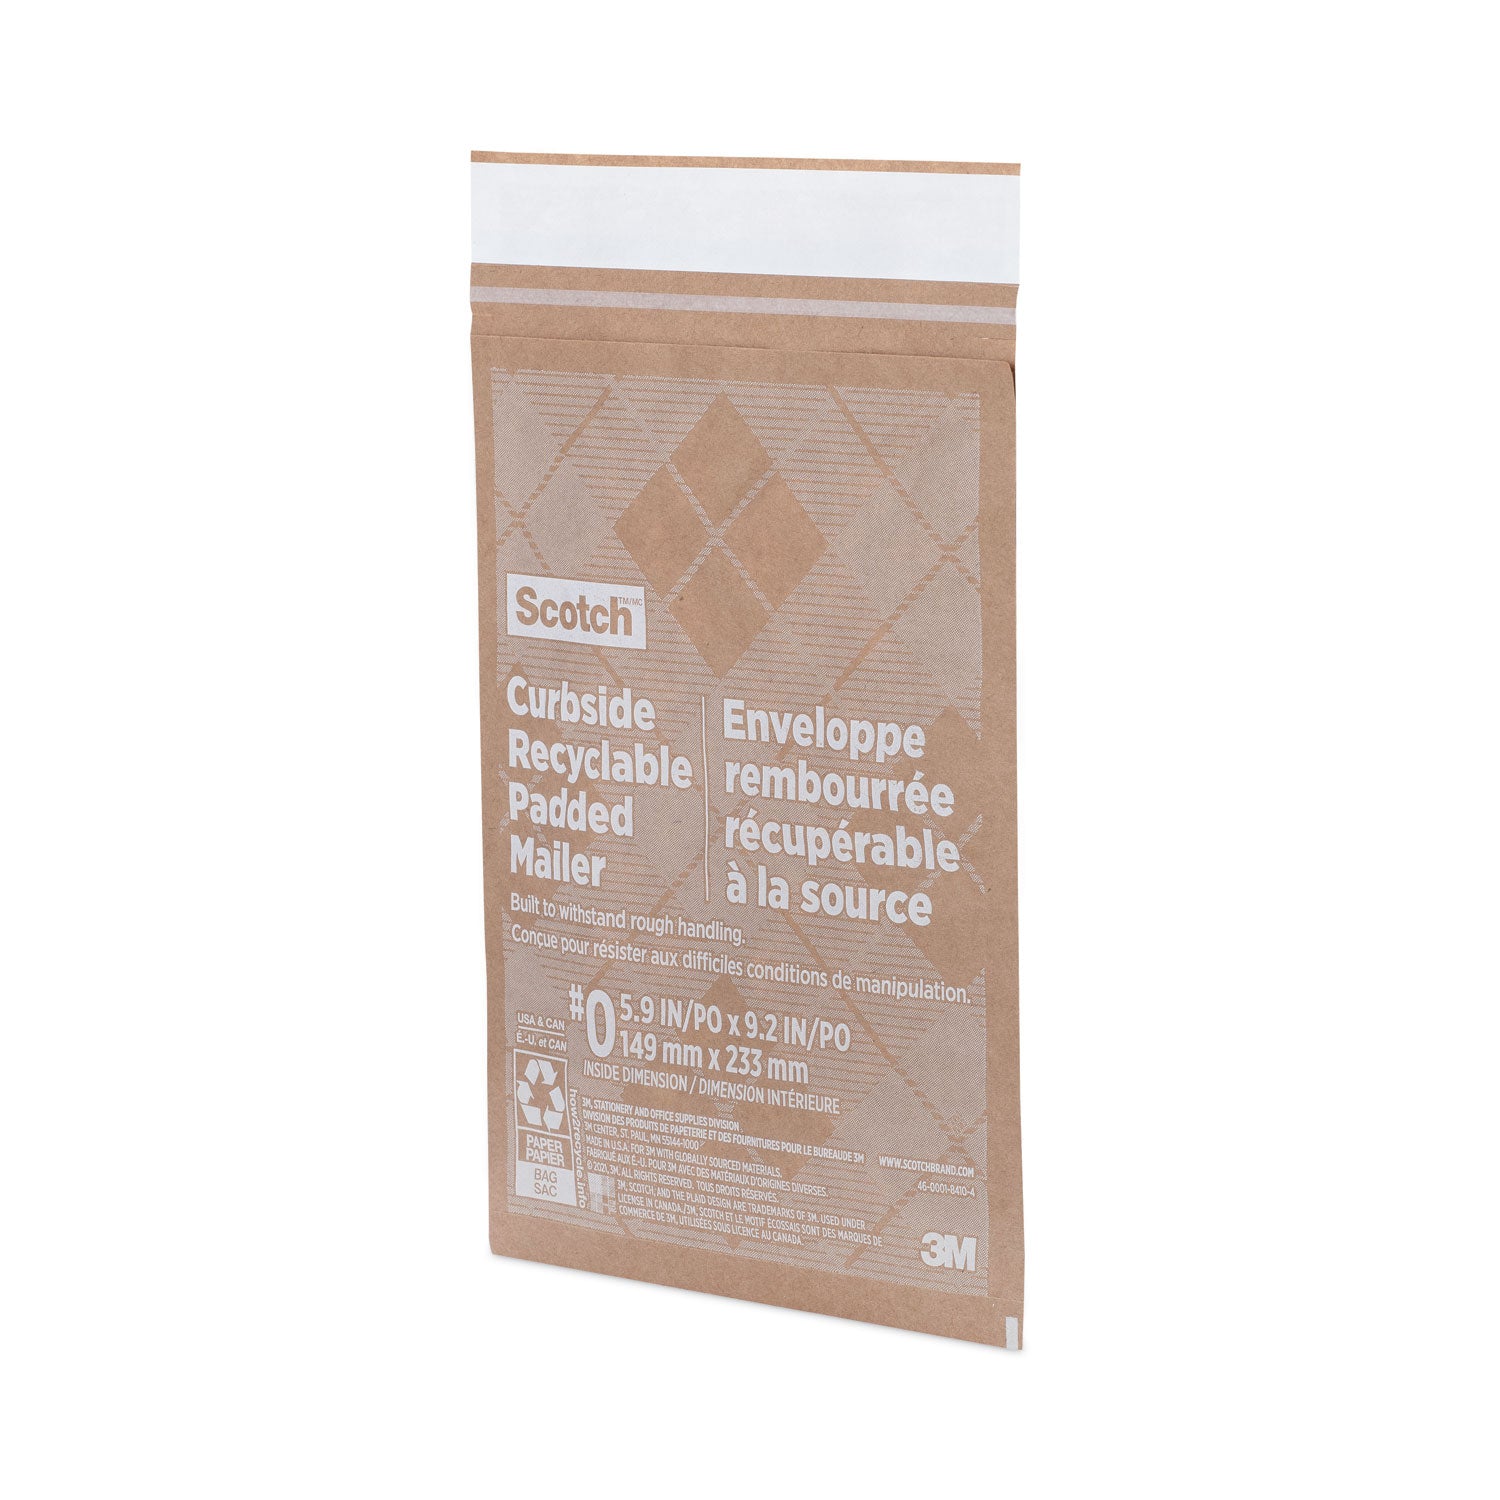 curbside-recyclable-padded-mailer-#0-bubble-cushion-self-adhesive-closure-7-x-1125-natural-kraft-100-carton_mmmcr01 - 2